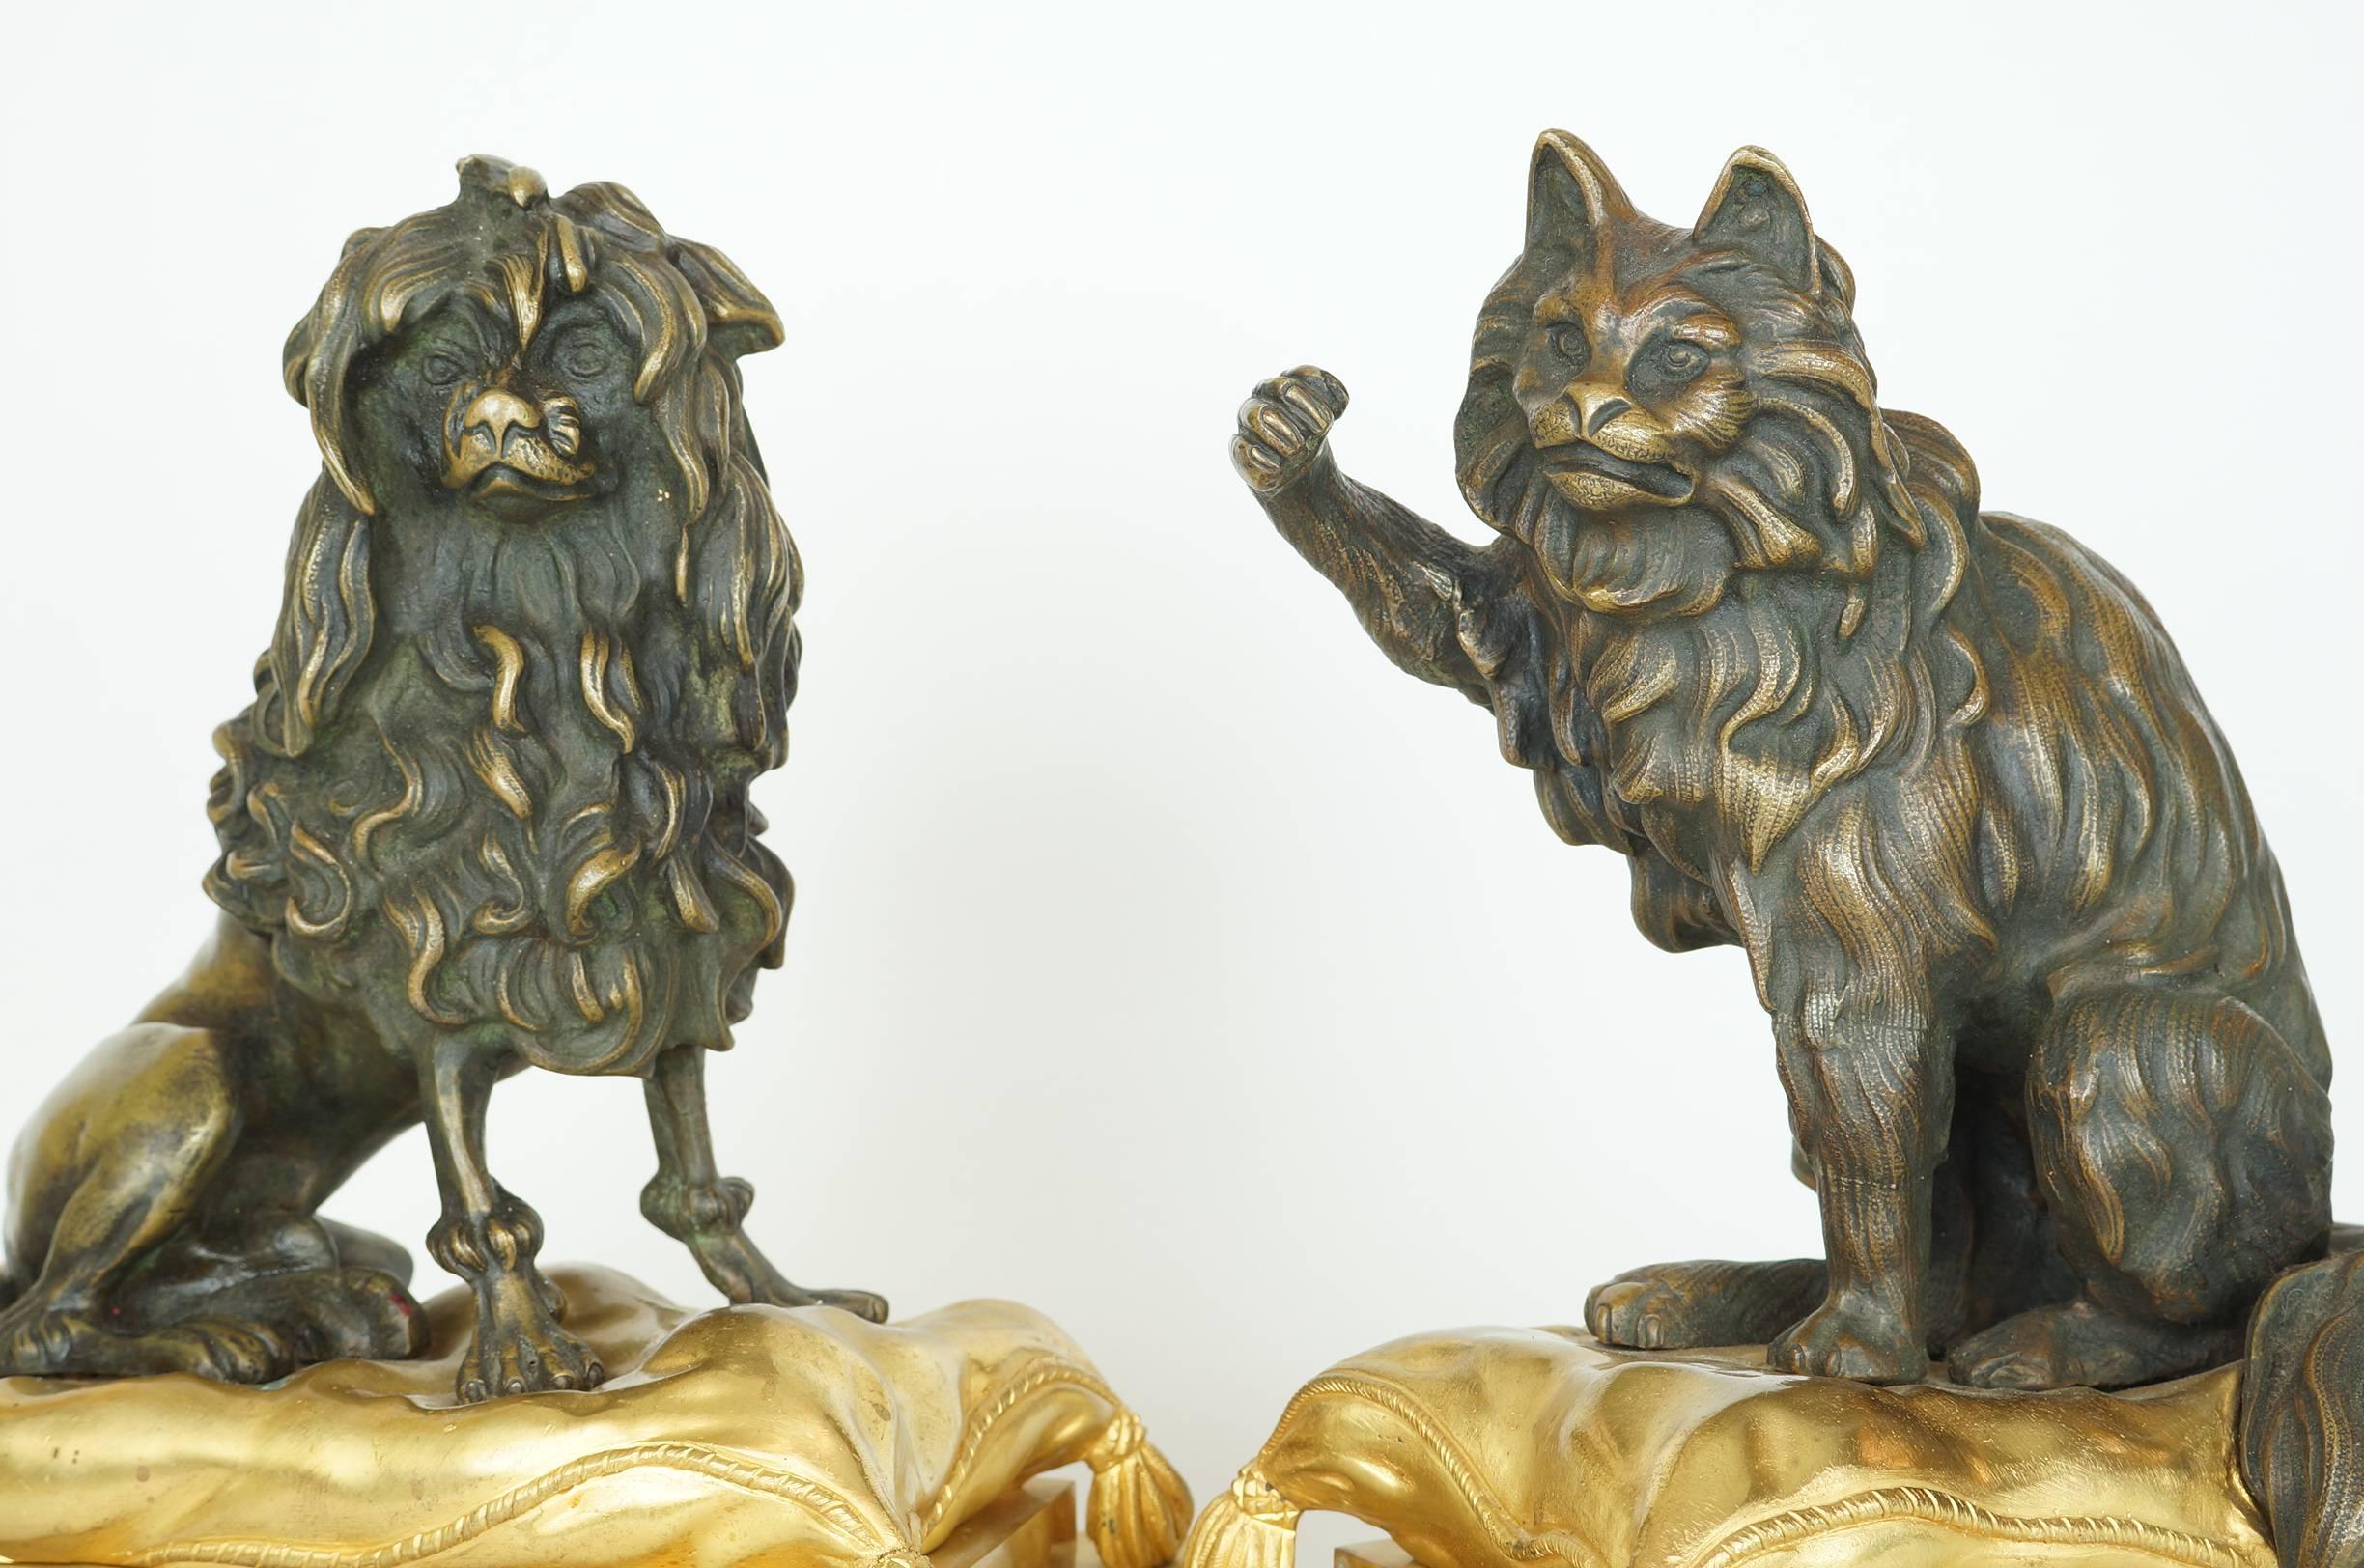 Large pair of bronze dog and cat figural fireplace chenets, each patinated bronze figure seated on gilt bronze pillow shaped bases.
Stock Number: MF19